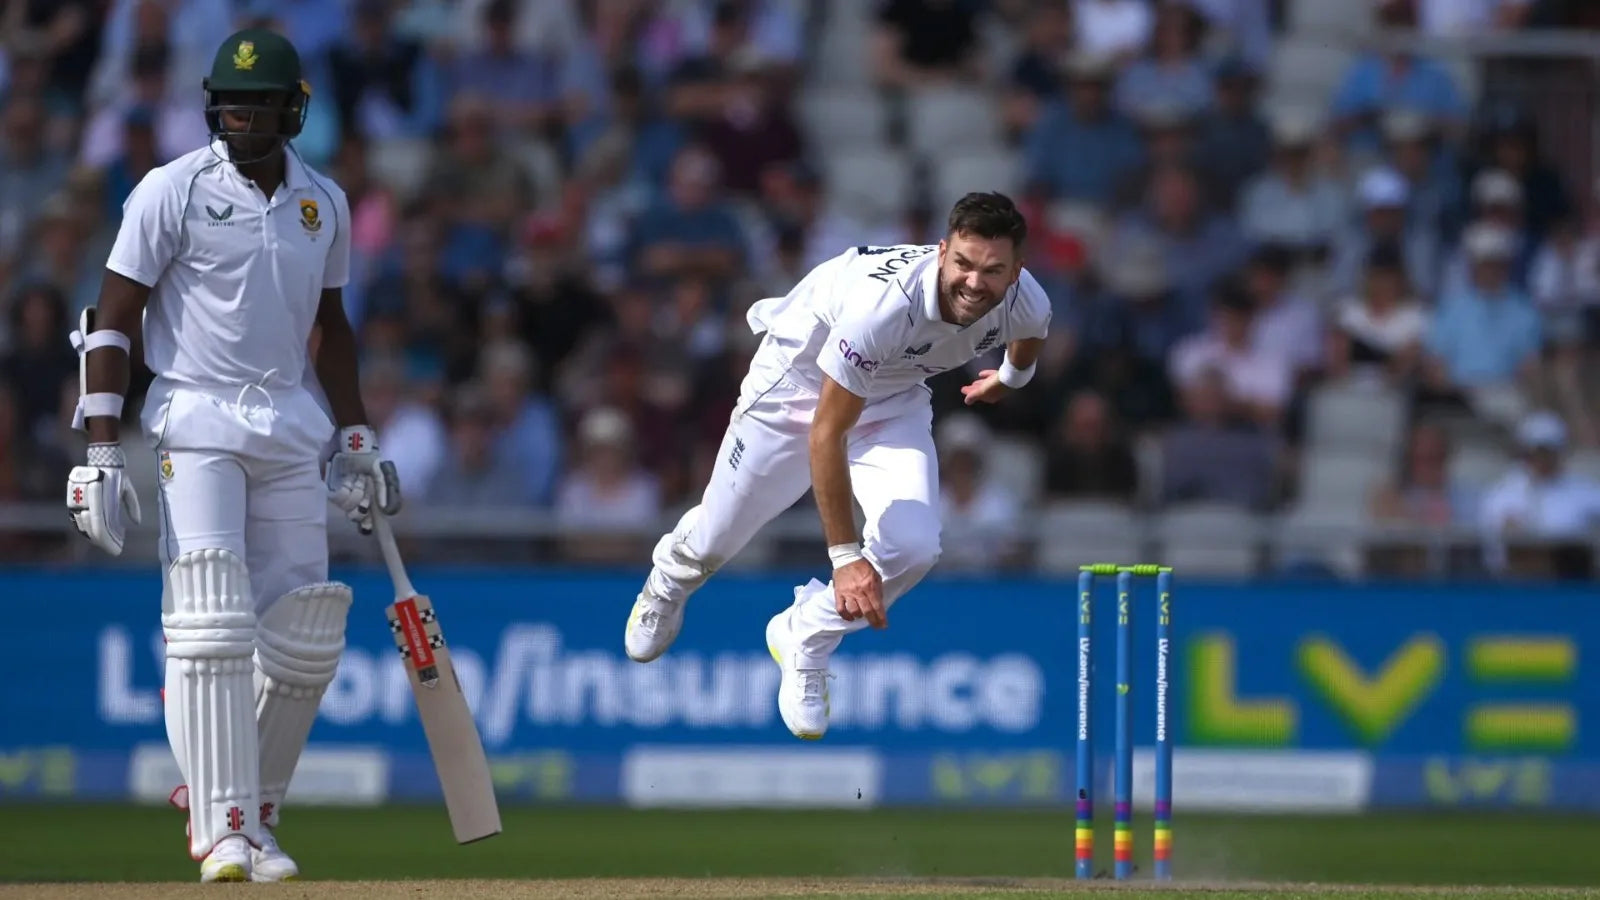 James Anderson does his bowling action before bowling a swing delivery